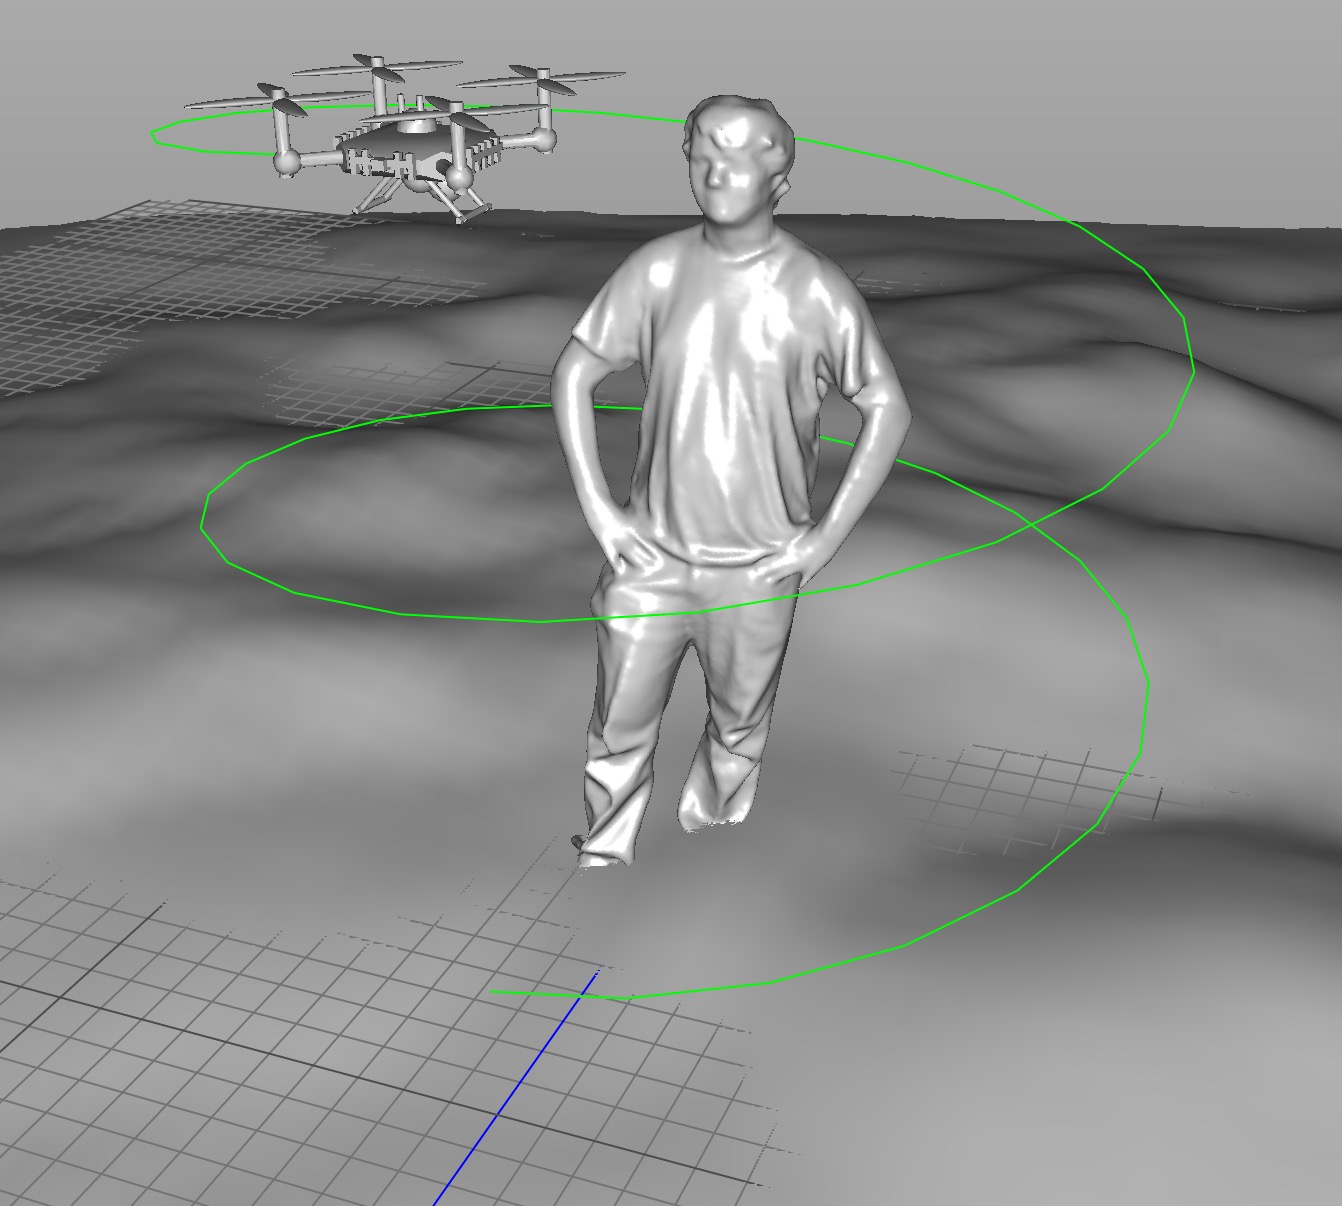  Could a drone perform a 3D scan on a human subject?  